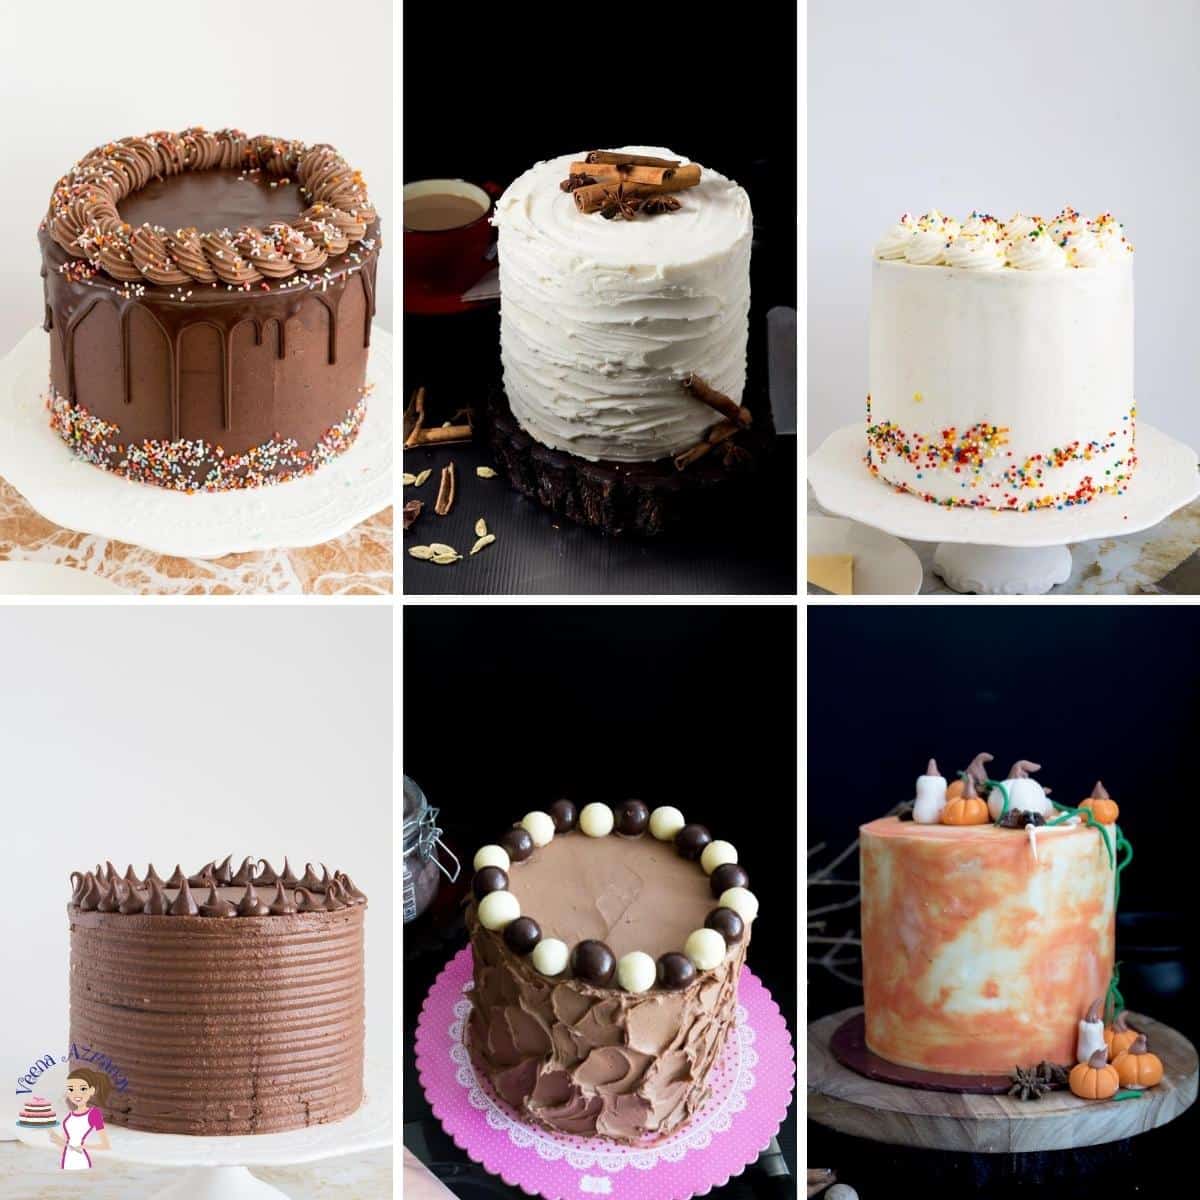 How to decorate a cake Masterclass for Beginners